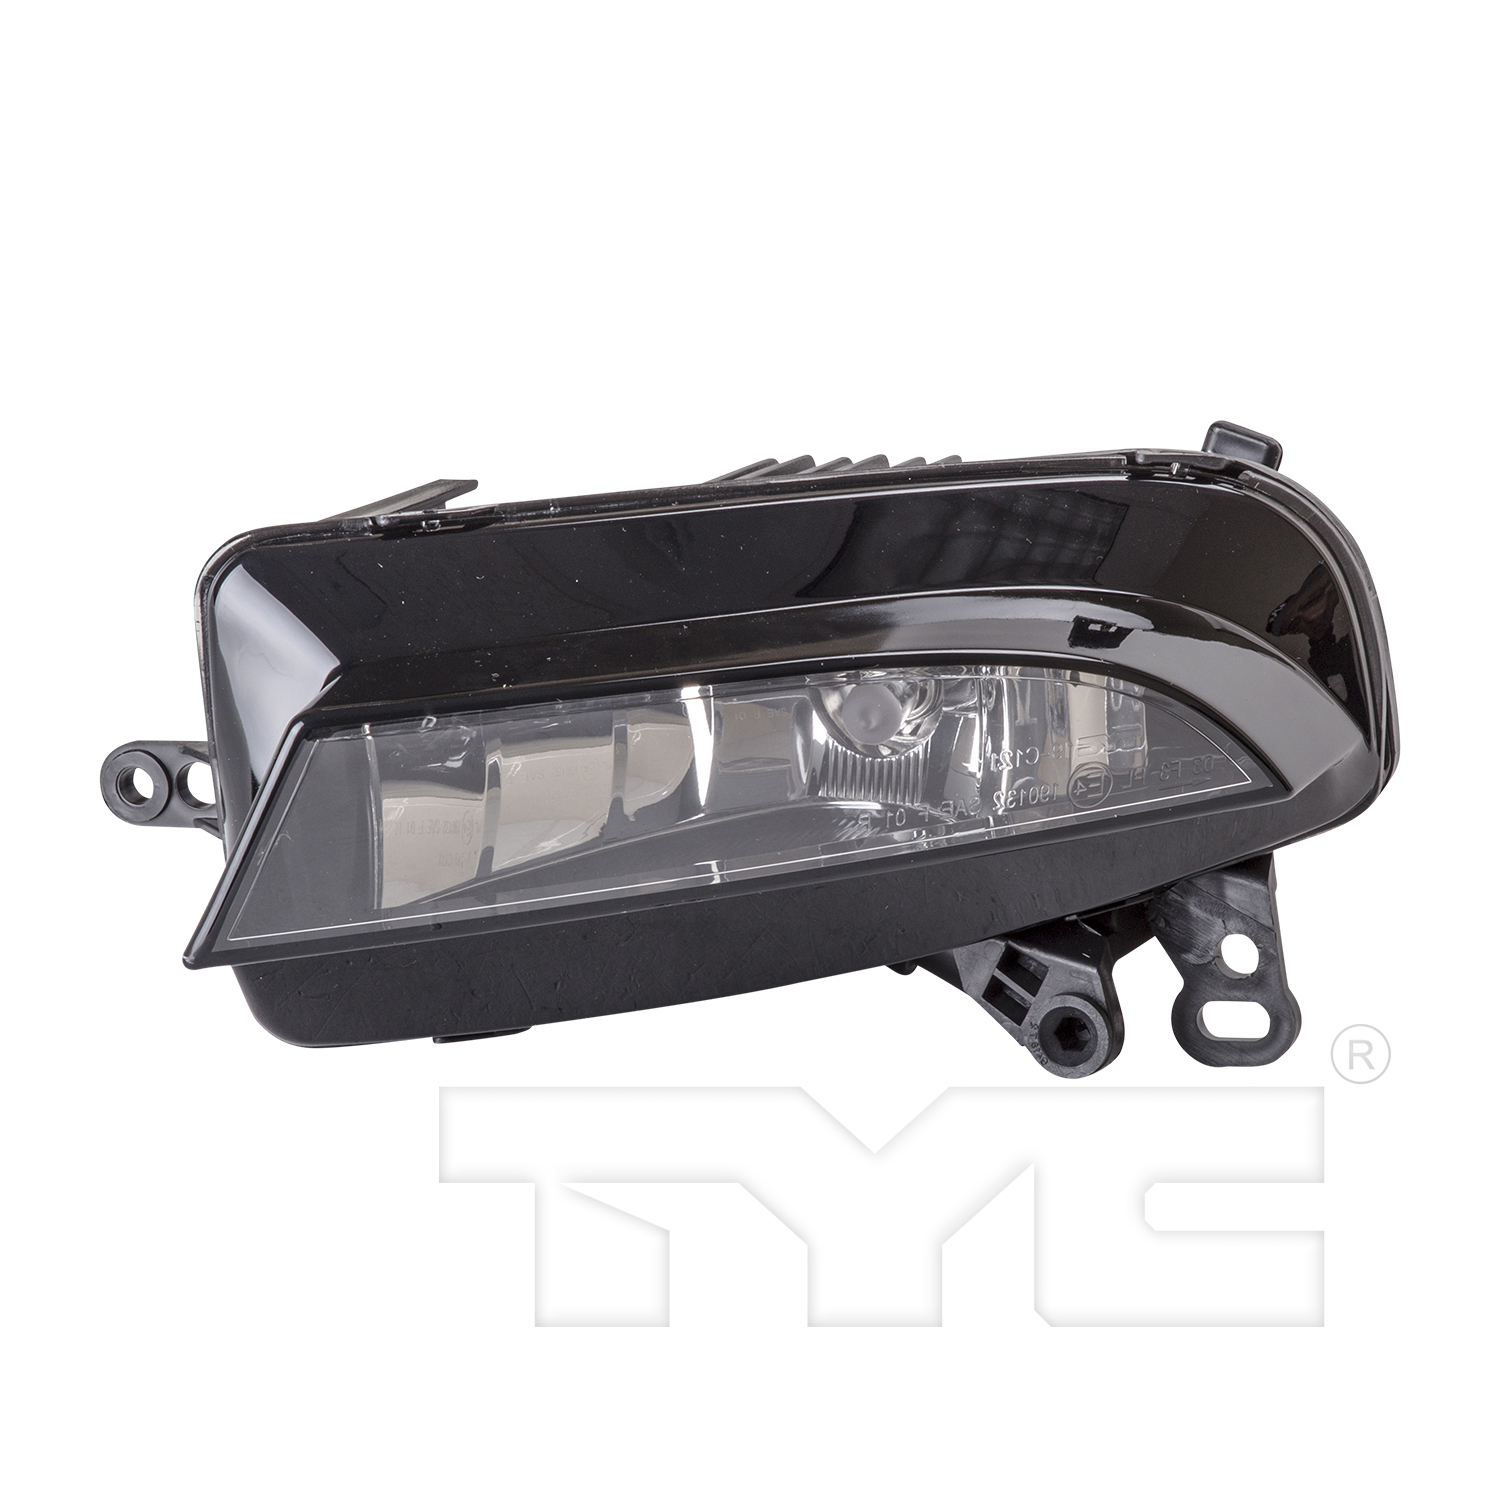 Aftermarket TAILLIGHTS for AUDI - A5 QUATTRO, A5 QUATTRO,12-16,LT Fog lamp assy